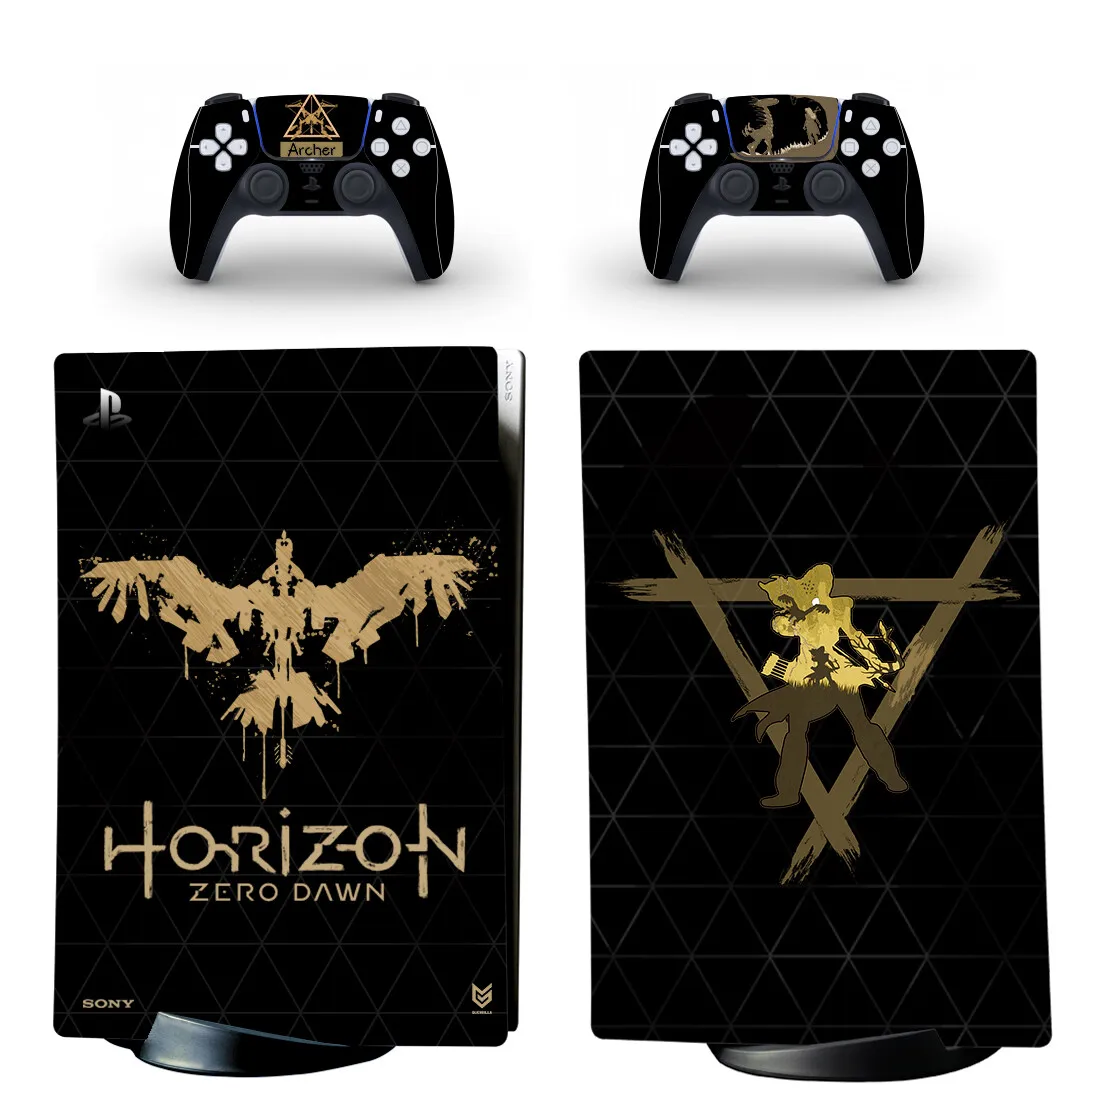 

Horizon Zero Dawn PS5 Digital Edition Skin Sticker Decal Cover for PlayStation 5 Console and Controllers PS5 Skin Sticker Vinyl